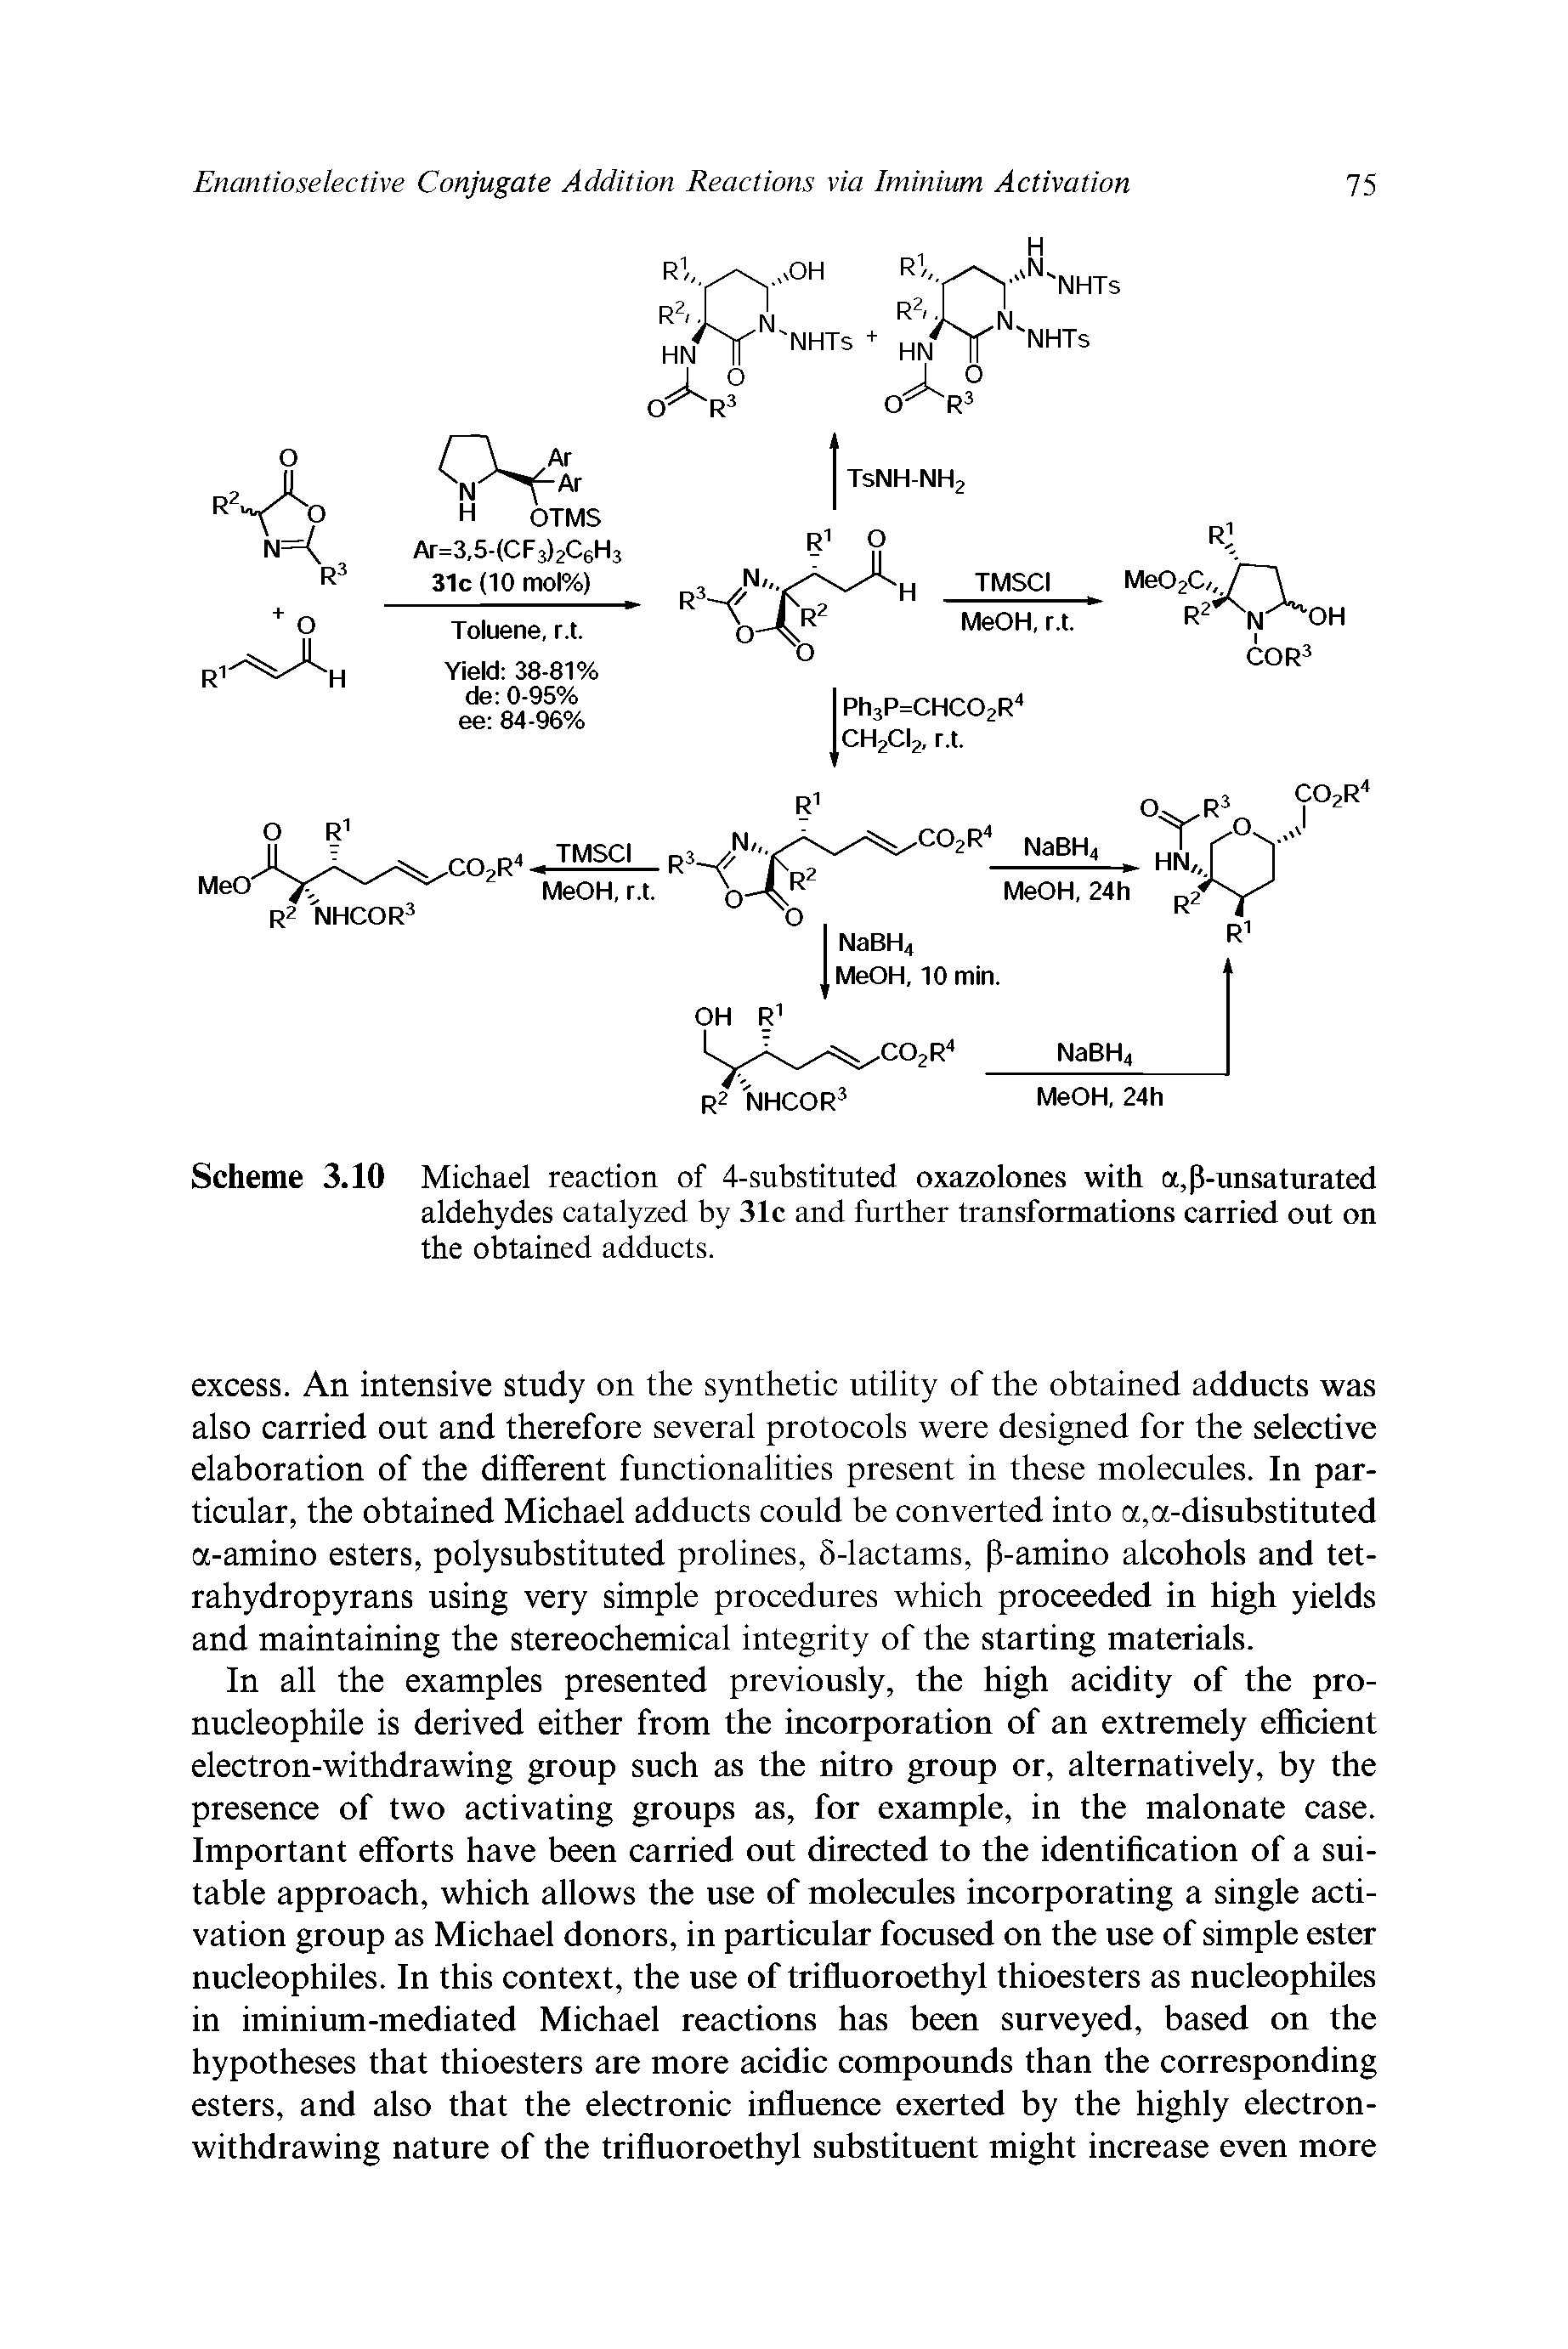 Scheme 3.10 Michael reaction of 4-substituted oxazolones with a,P-unsaturated aldehydes catalyzed by 31c and further transformations carried out on the obtained adducts.